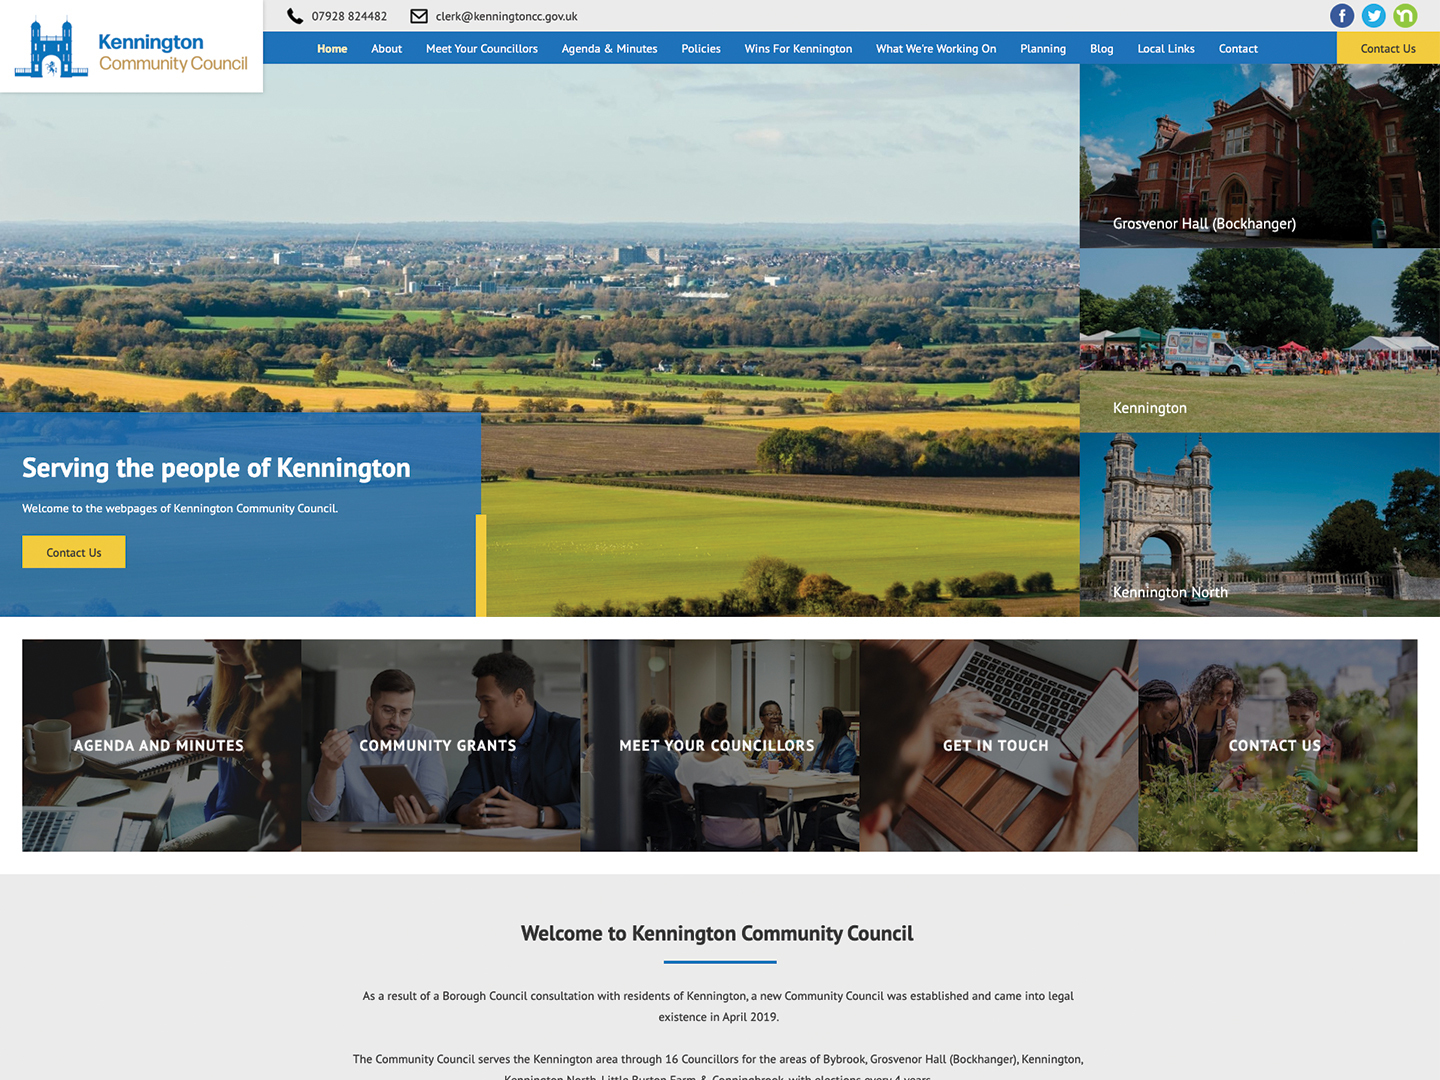 The Kennington community council website, created by it'seeze